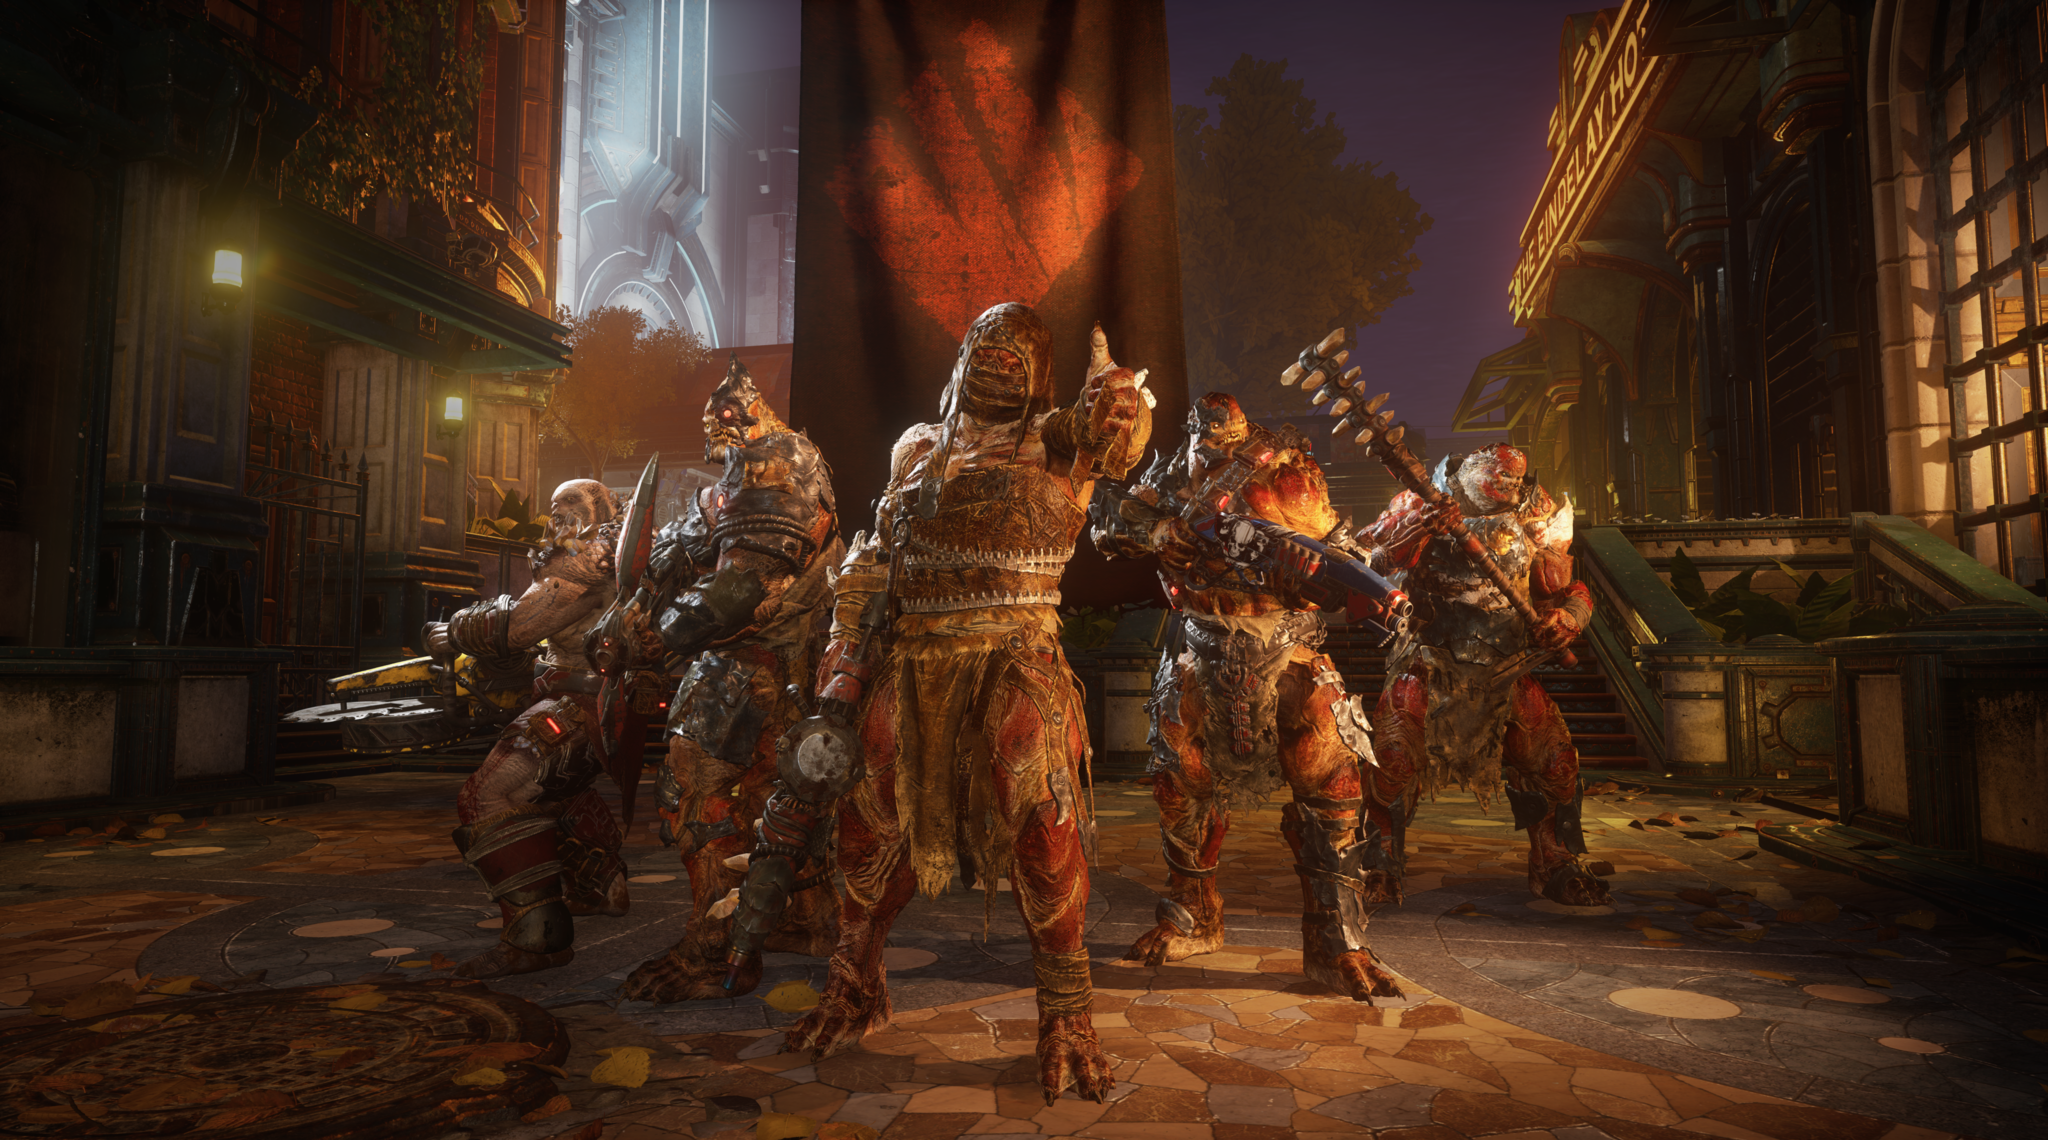 Is there Gears 5 Crossplay and Cross-Save across PC and Xbox One?